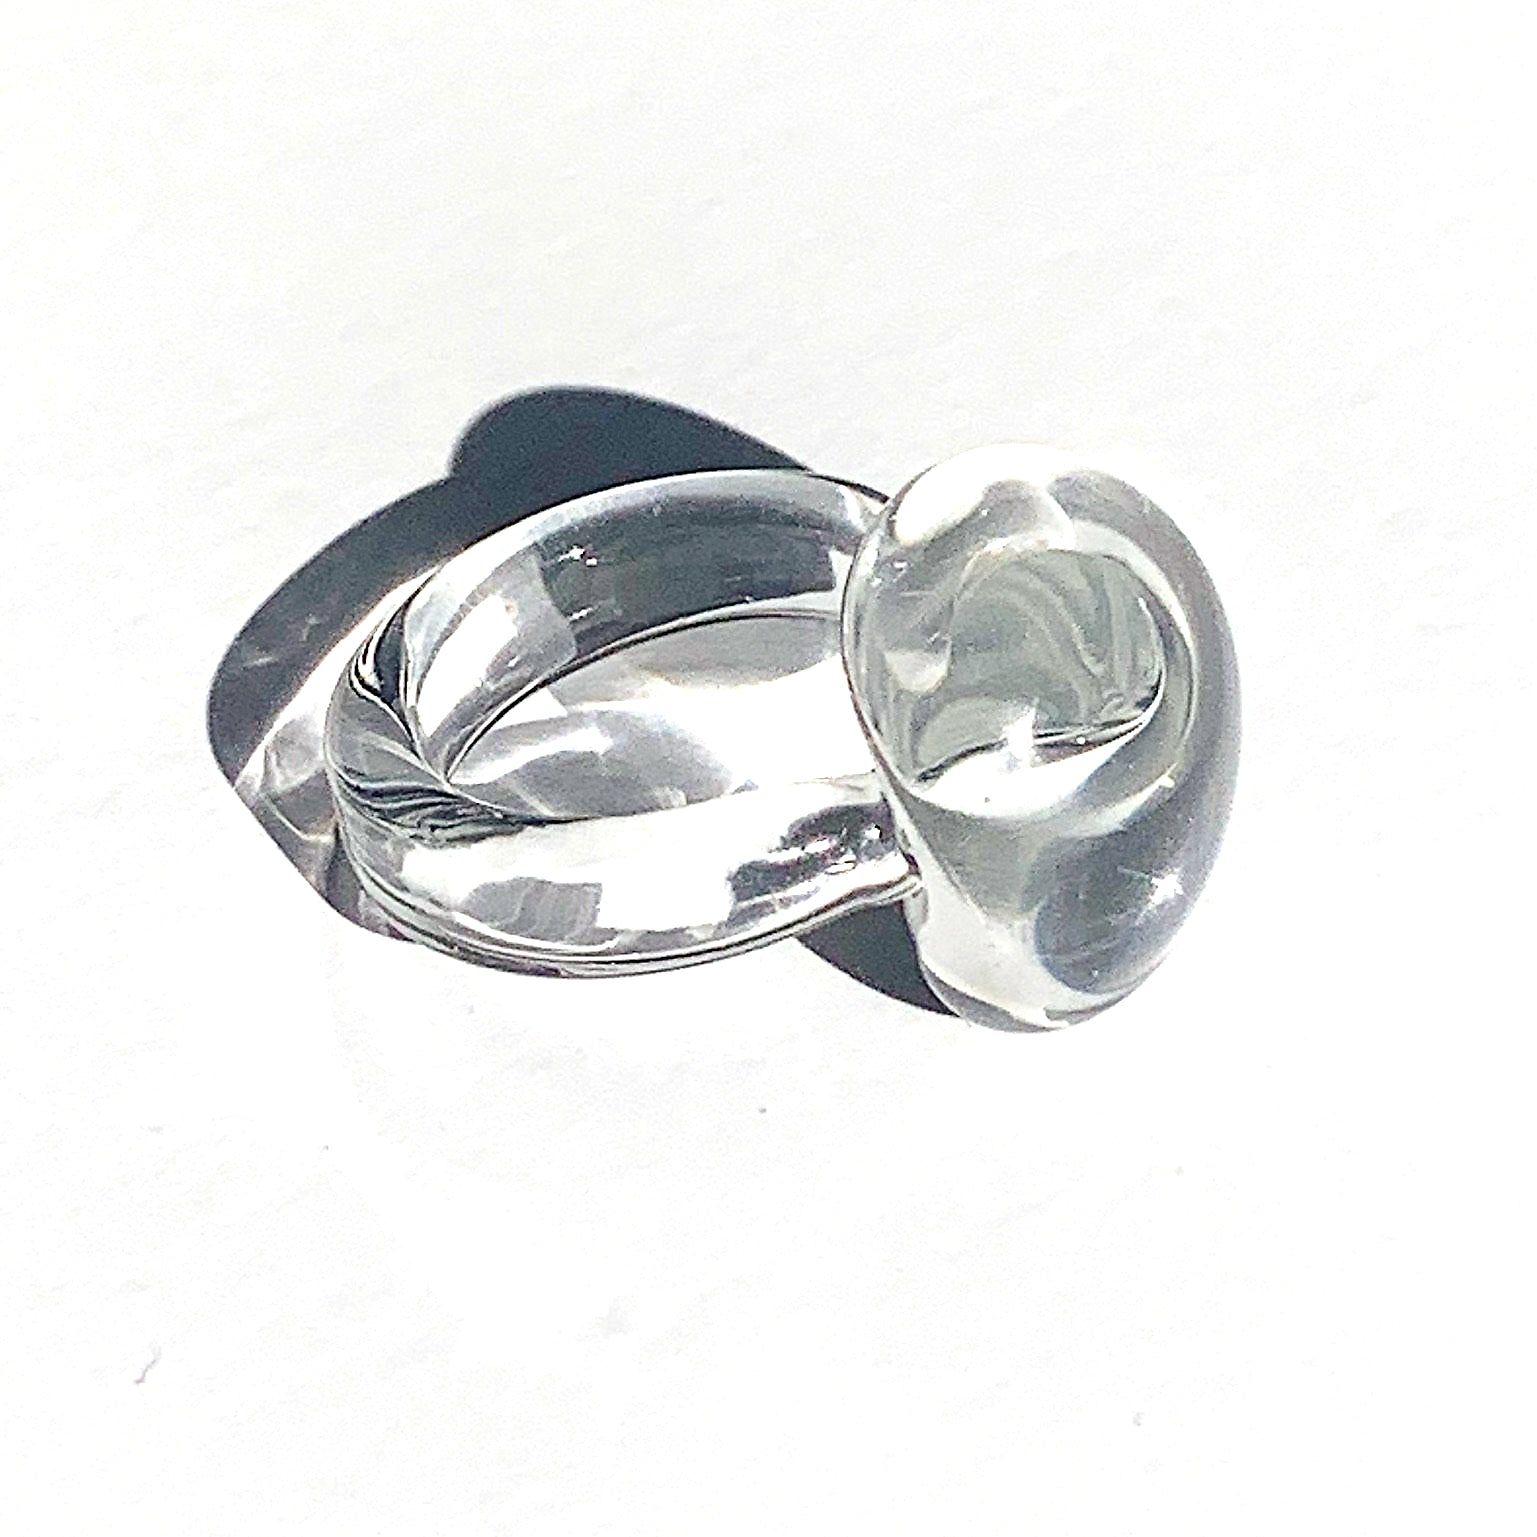 Full Transparency Jelly Bean Ring